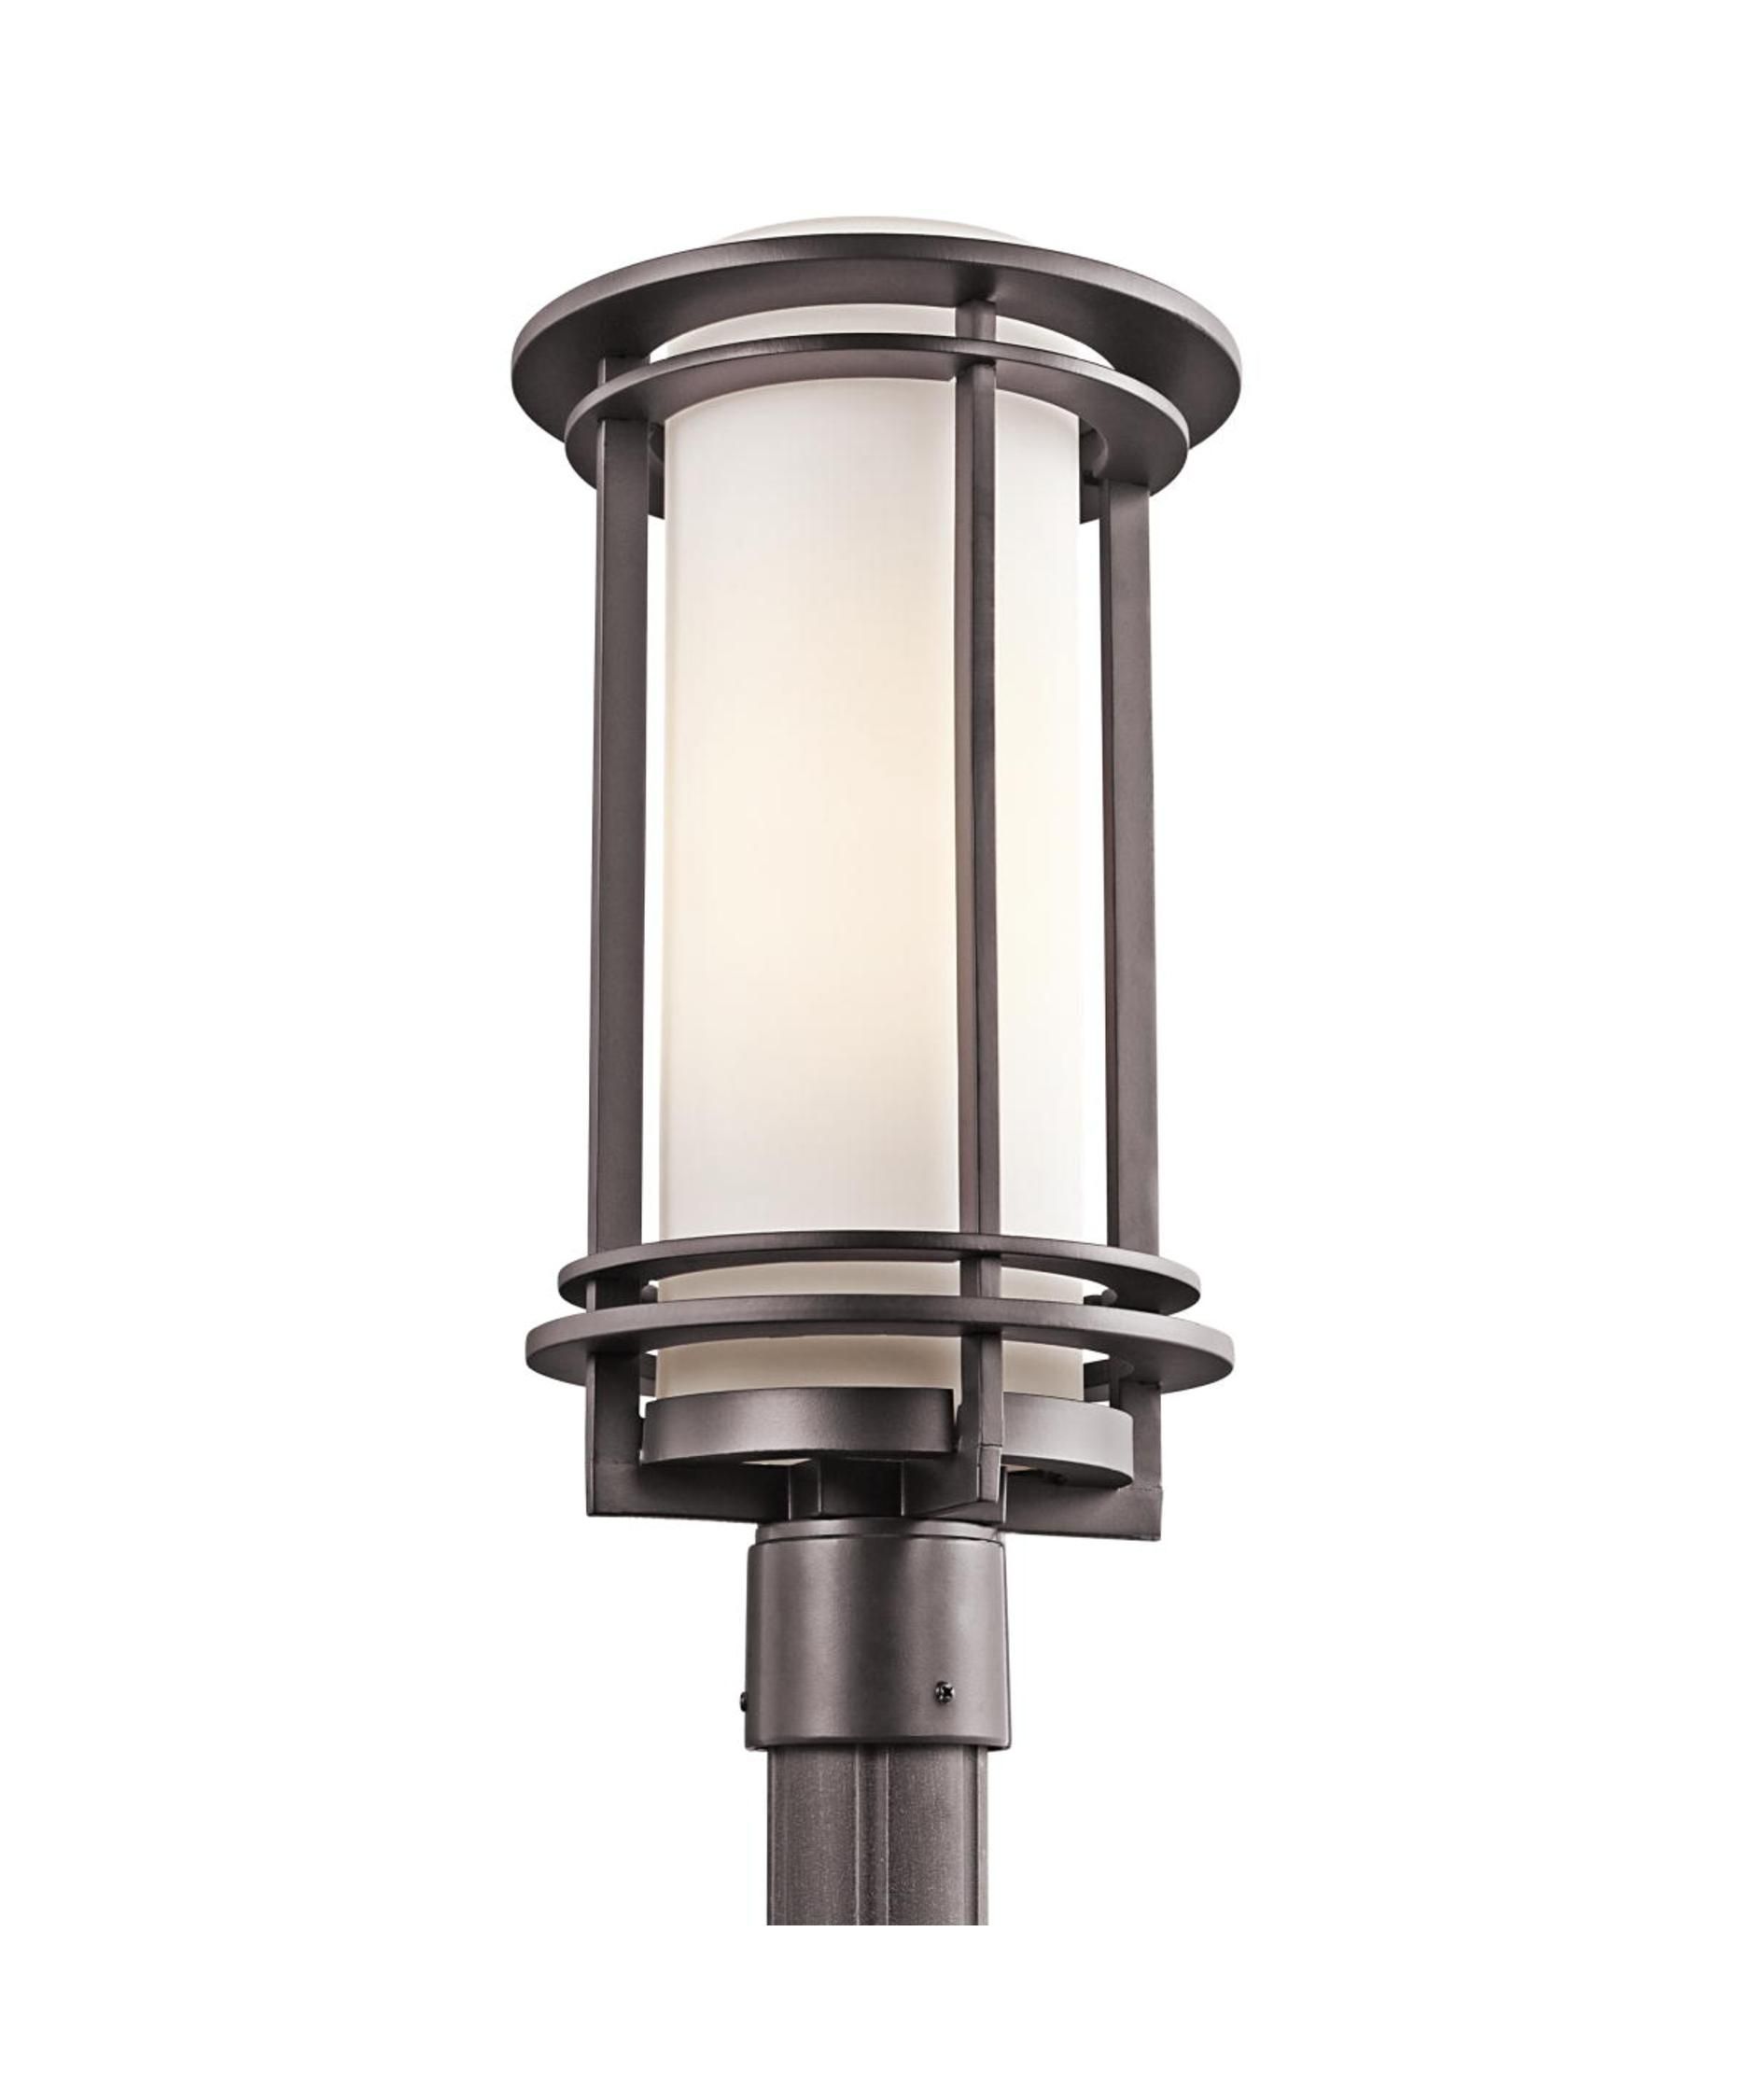 Kichler 49349 Pacific Edge 10 Inch Wide 1 Light Outdoor Post Lamp Intended For Outdoor Post Lights Kichler Lighting (View 9 of 15)